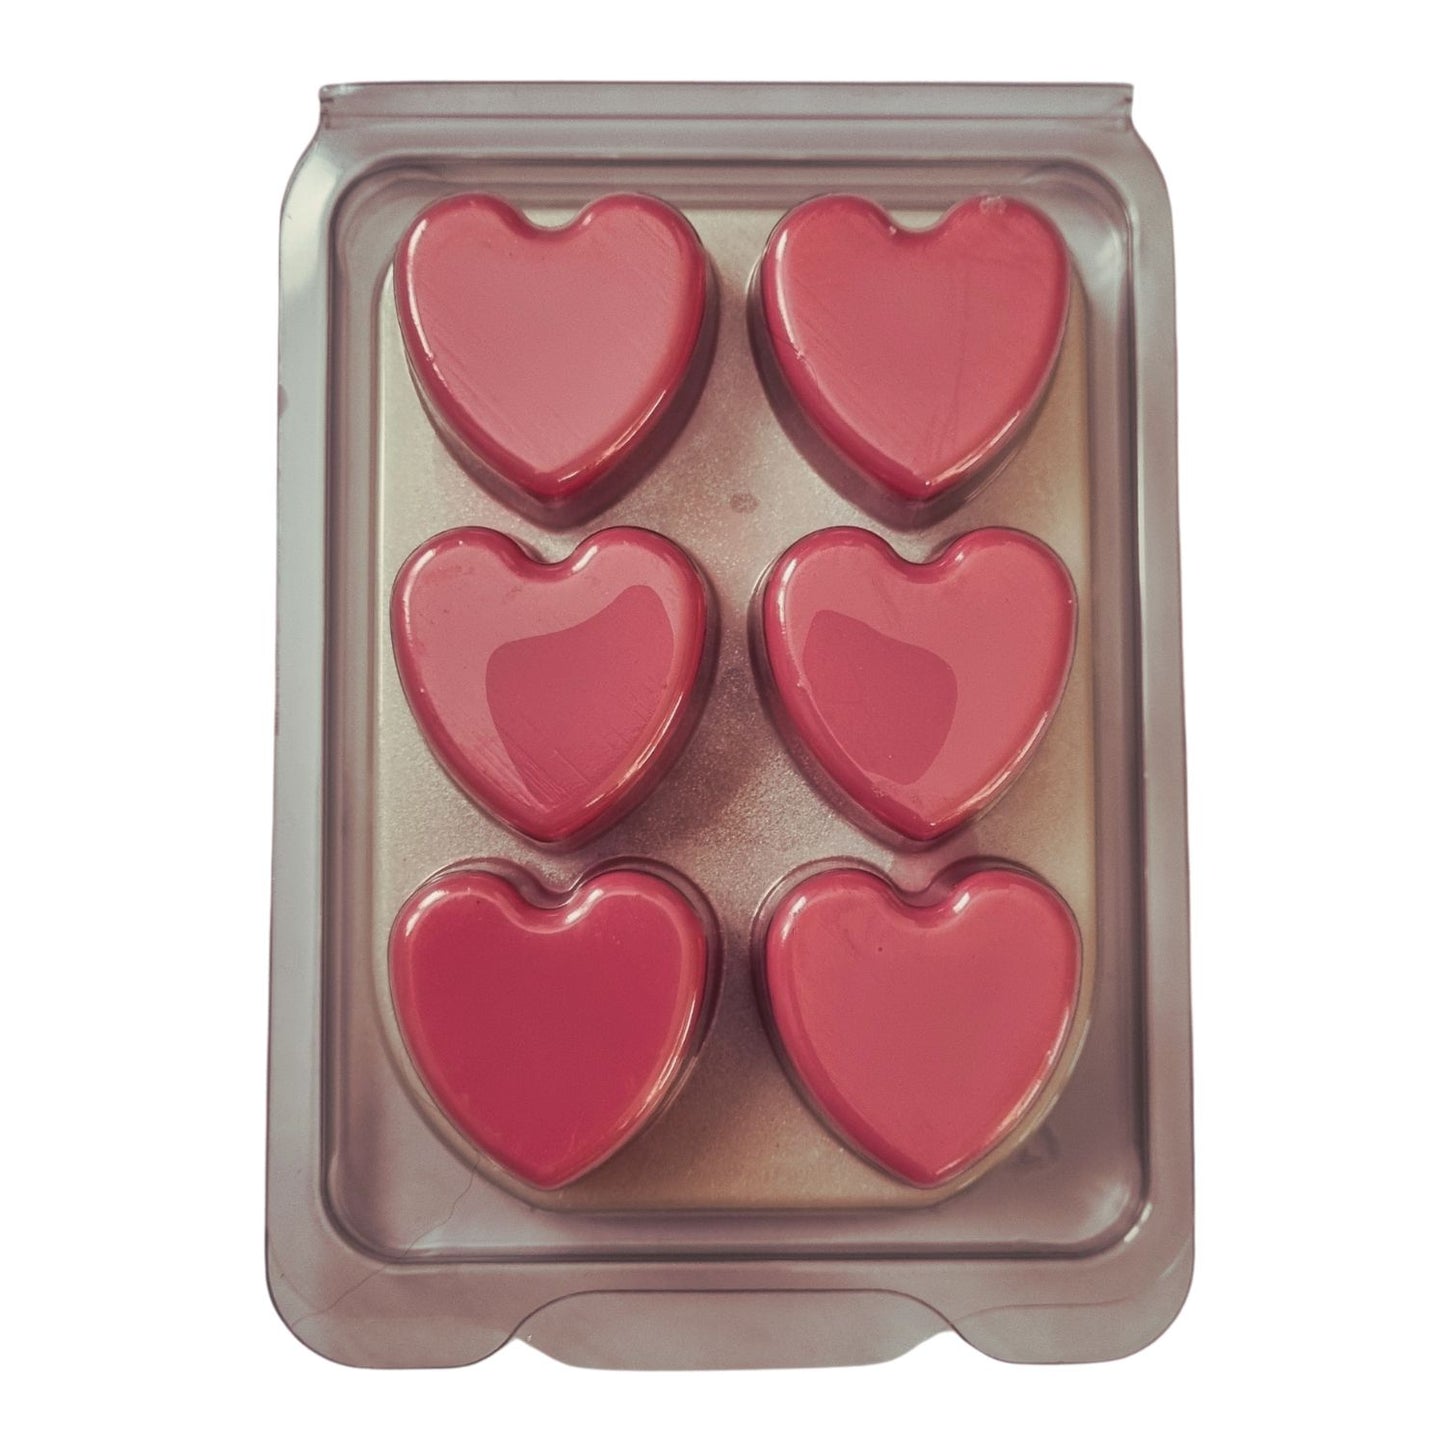 Scented Soy Wax Melts in hearts Clamshell with 6 soft pink Hearts on white wax melt background